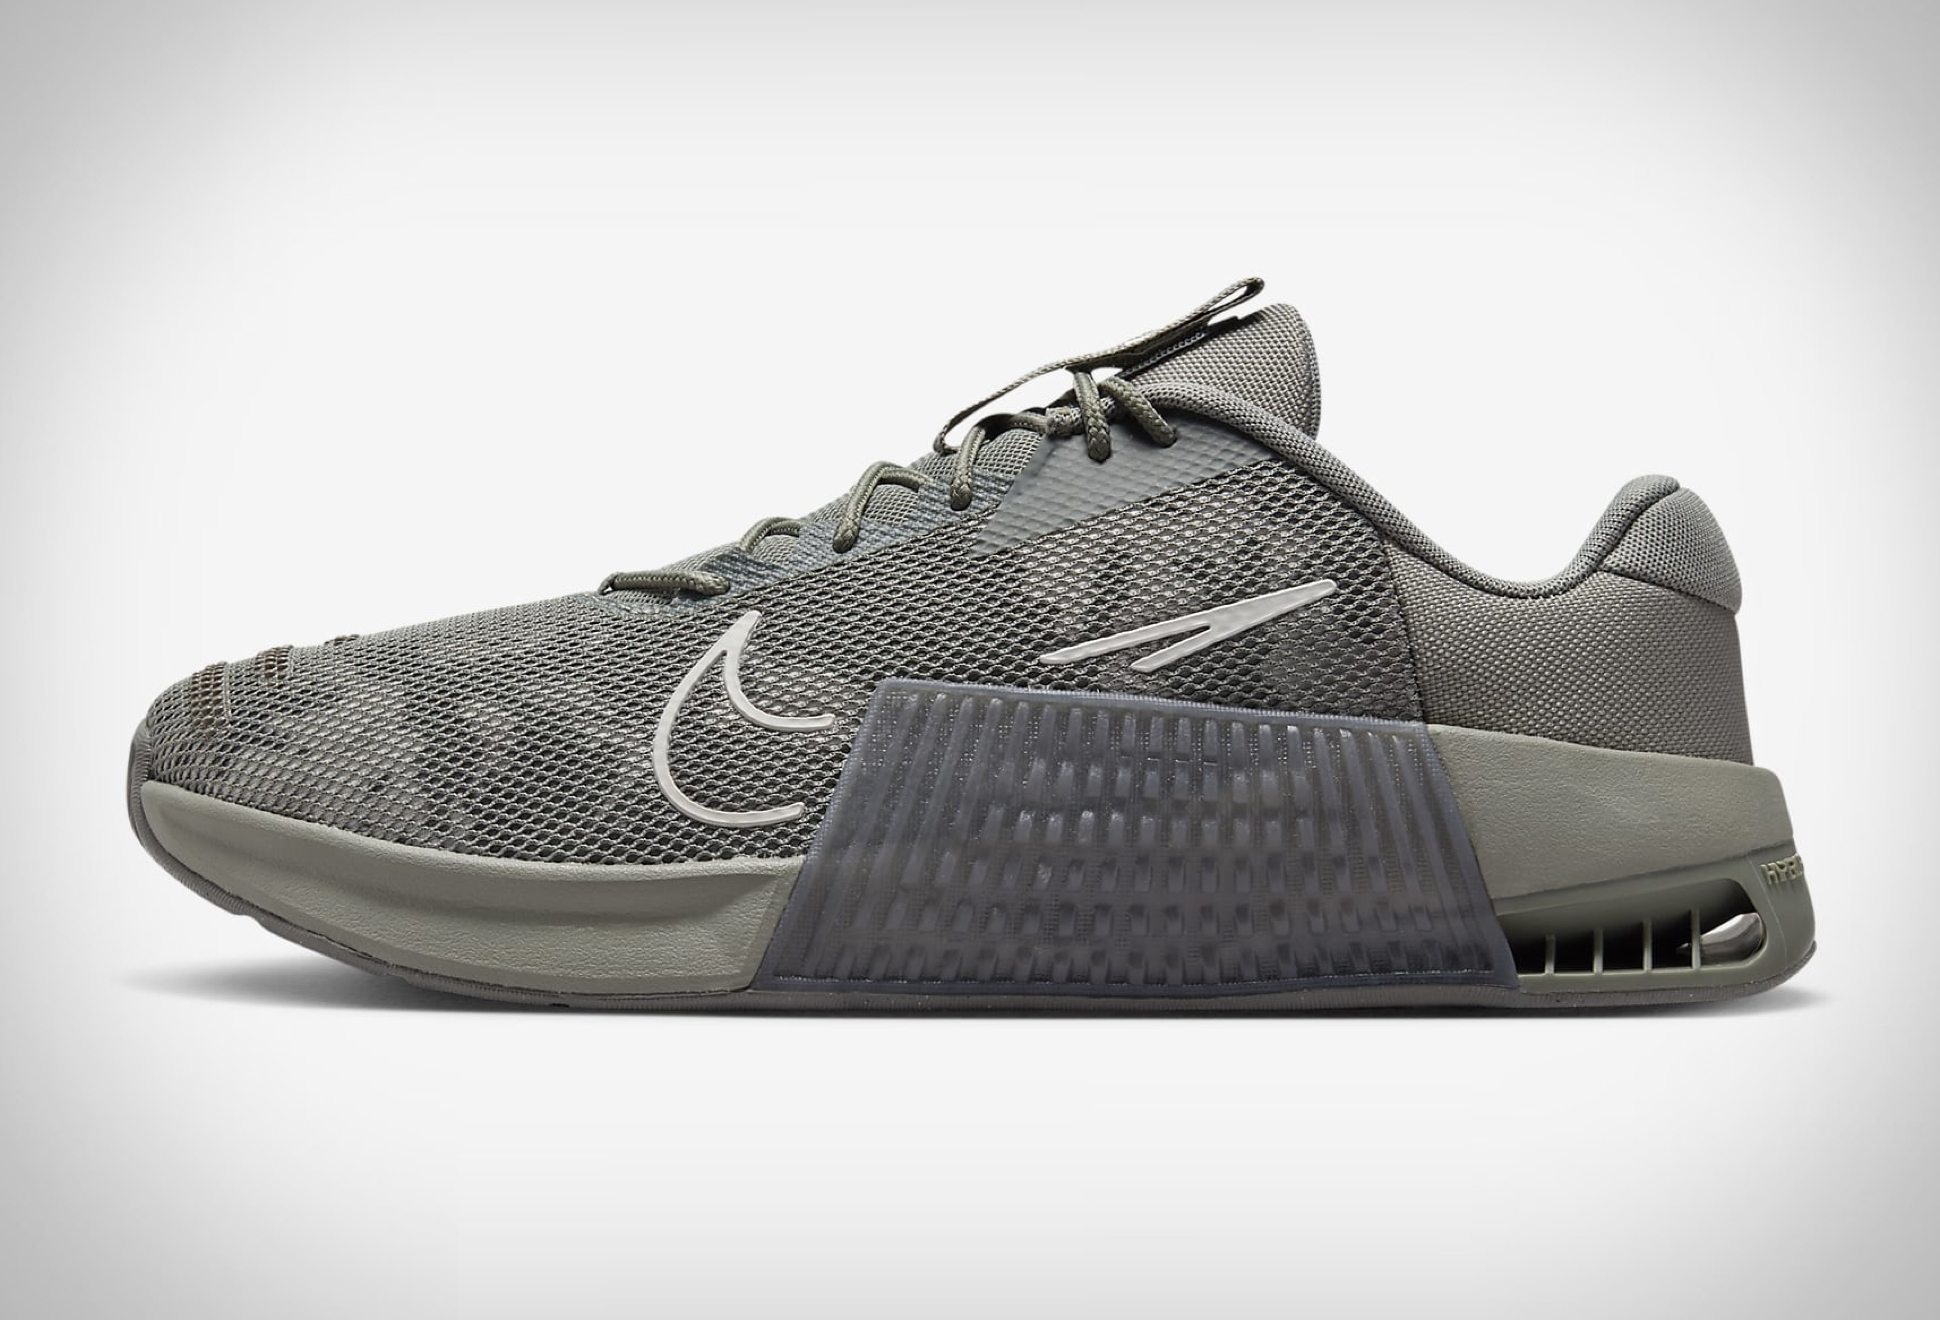 Nike Metcon 9 Workout Shoes | Image